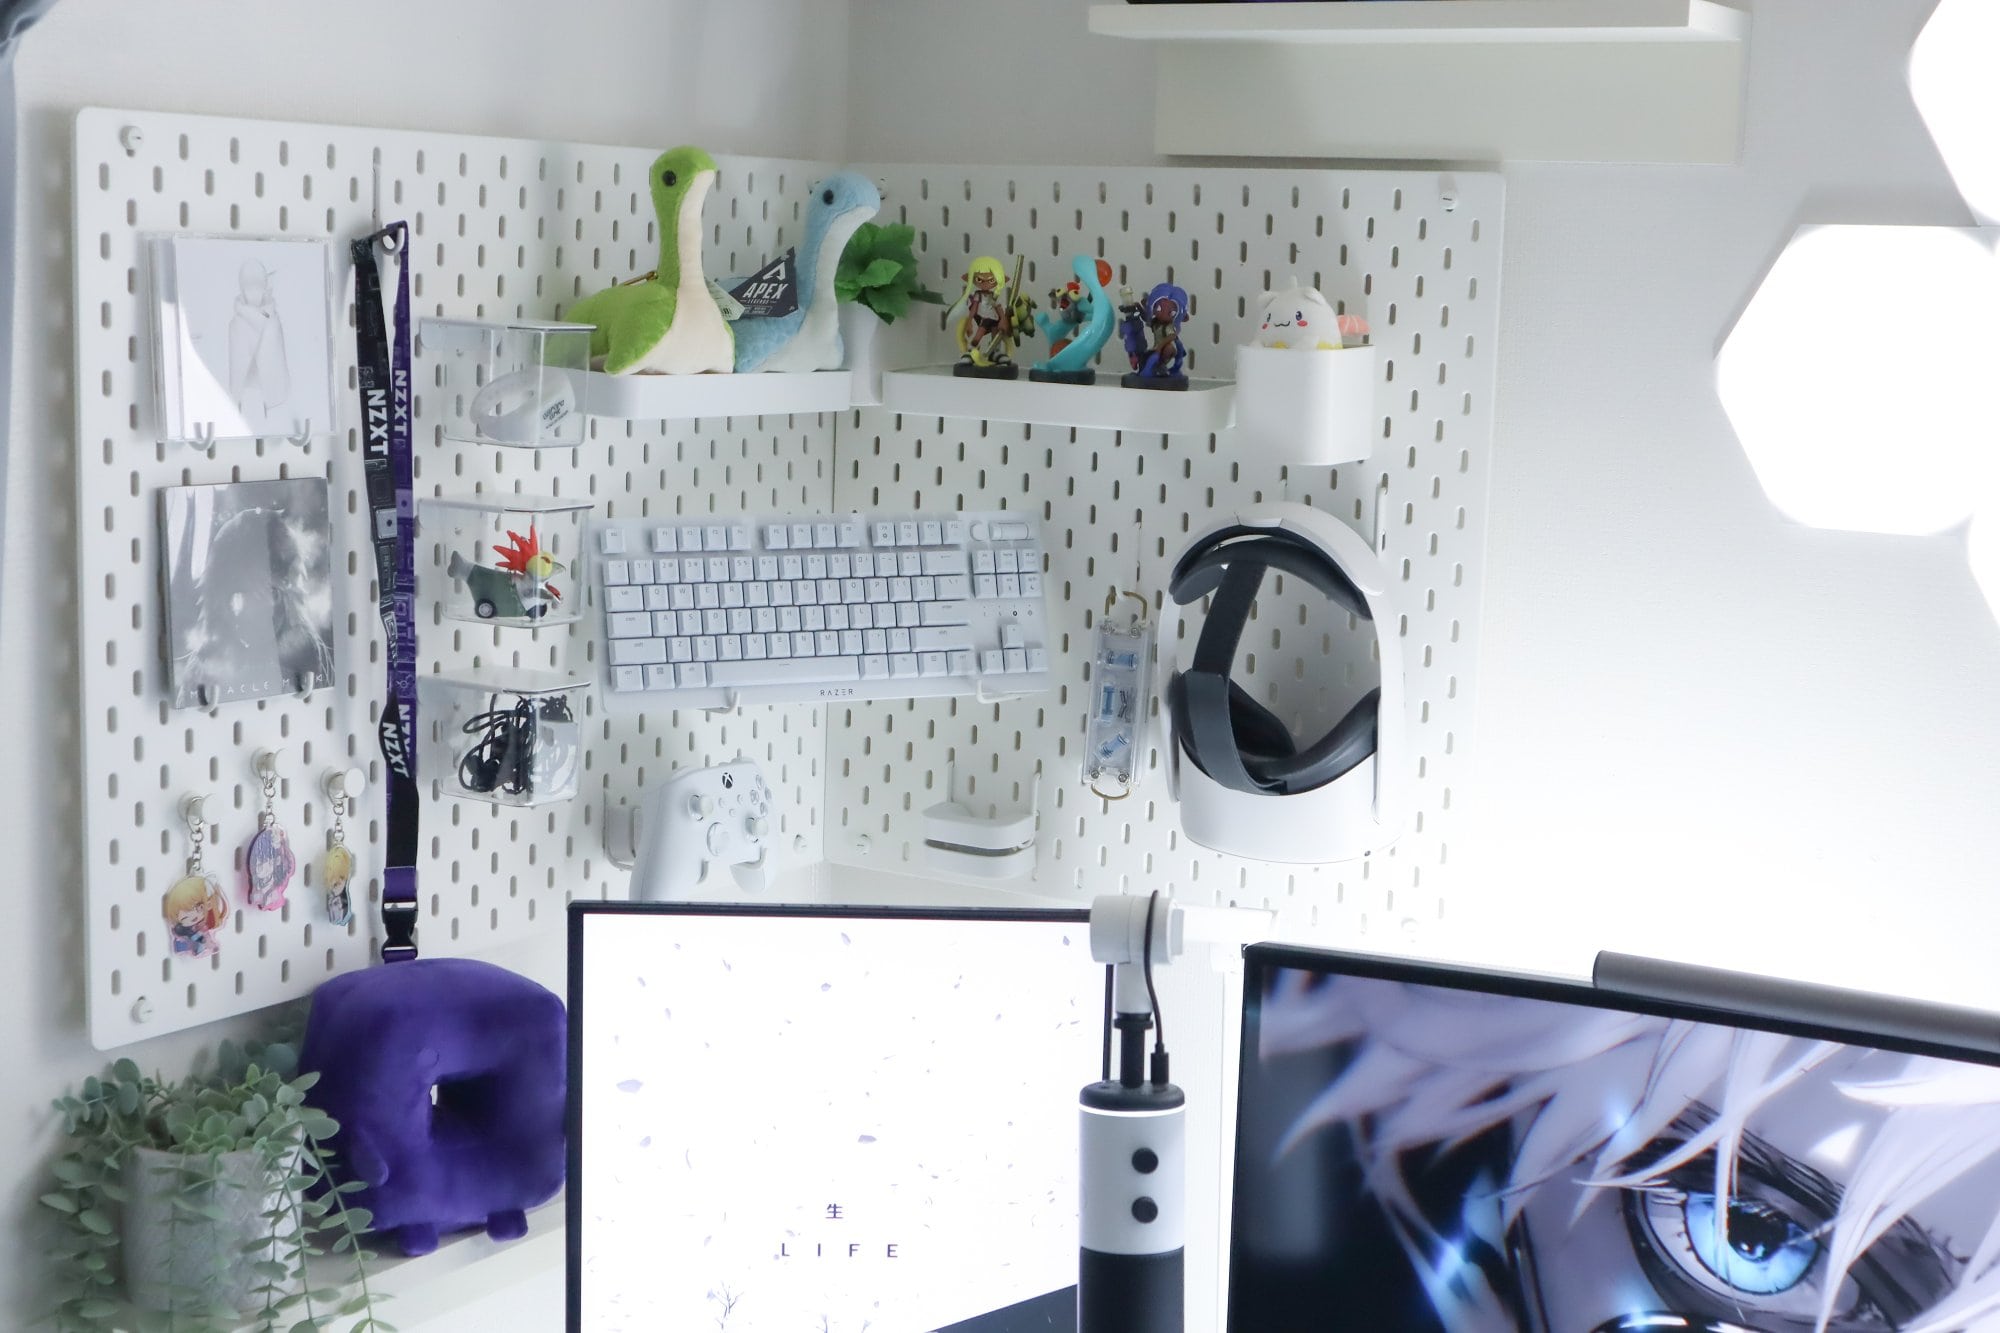 A creative home workspace corner with white pegboards organising various items such as a mechanical keyboard, gaming headset, and collectible figurines